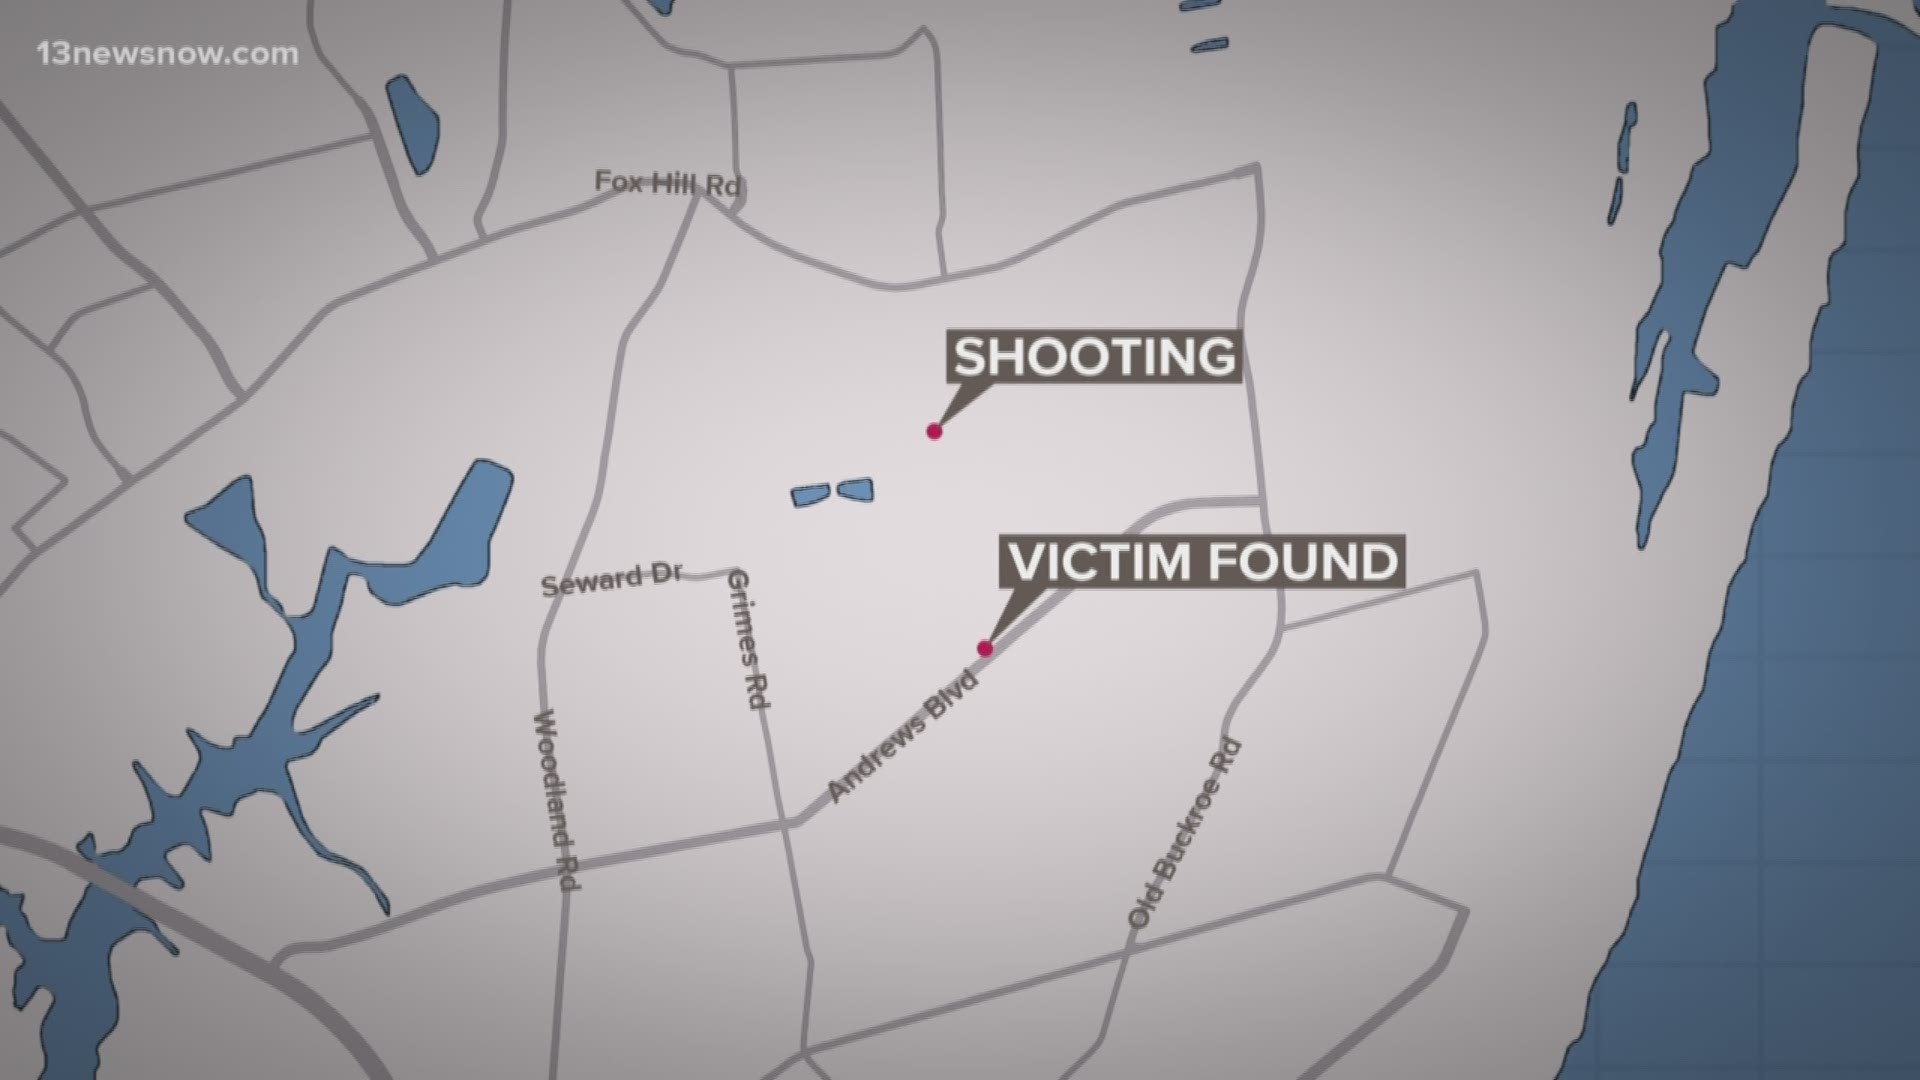 A man was shot in Hampton during an argument. Police are searching for the suspect